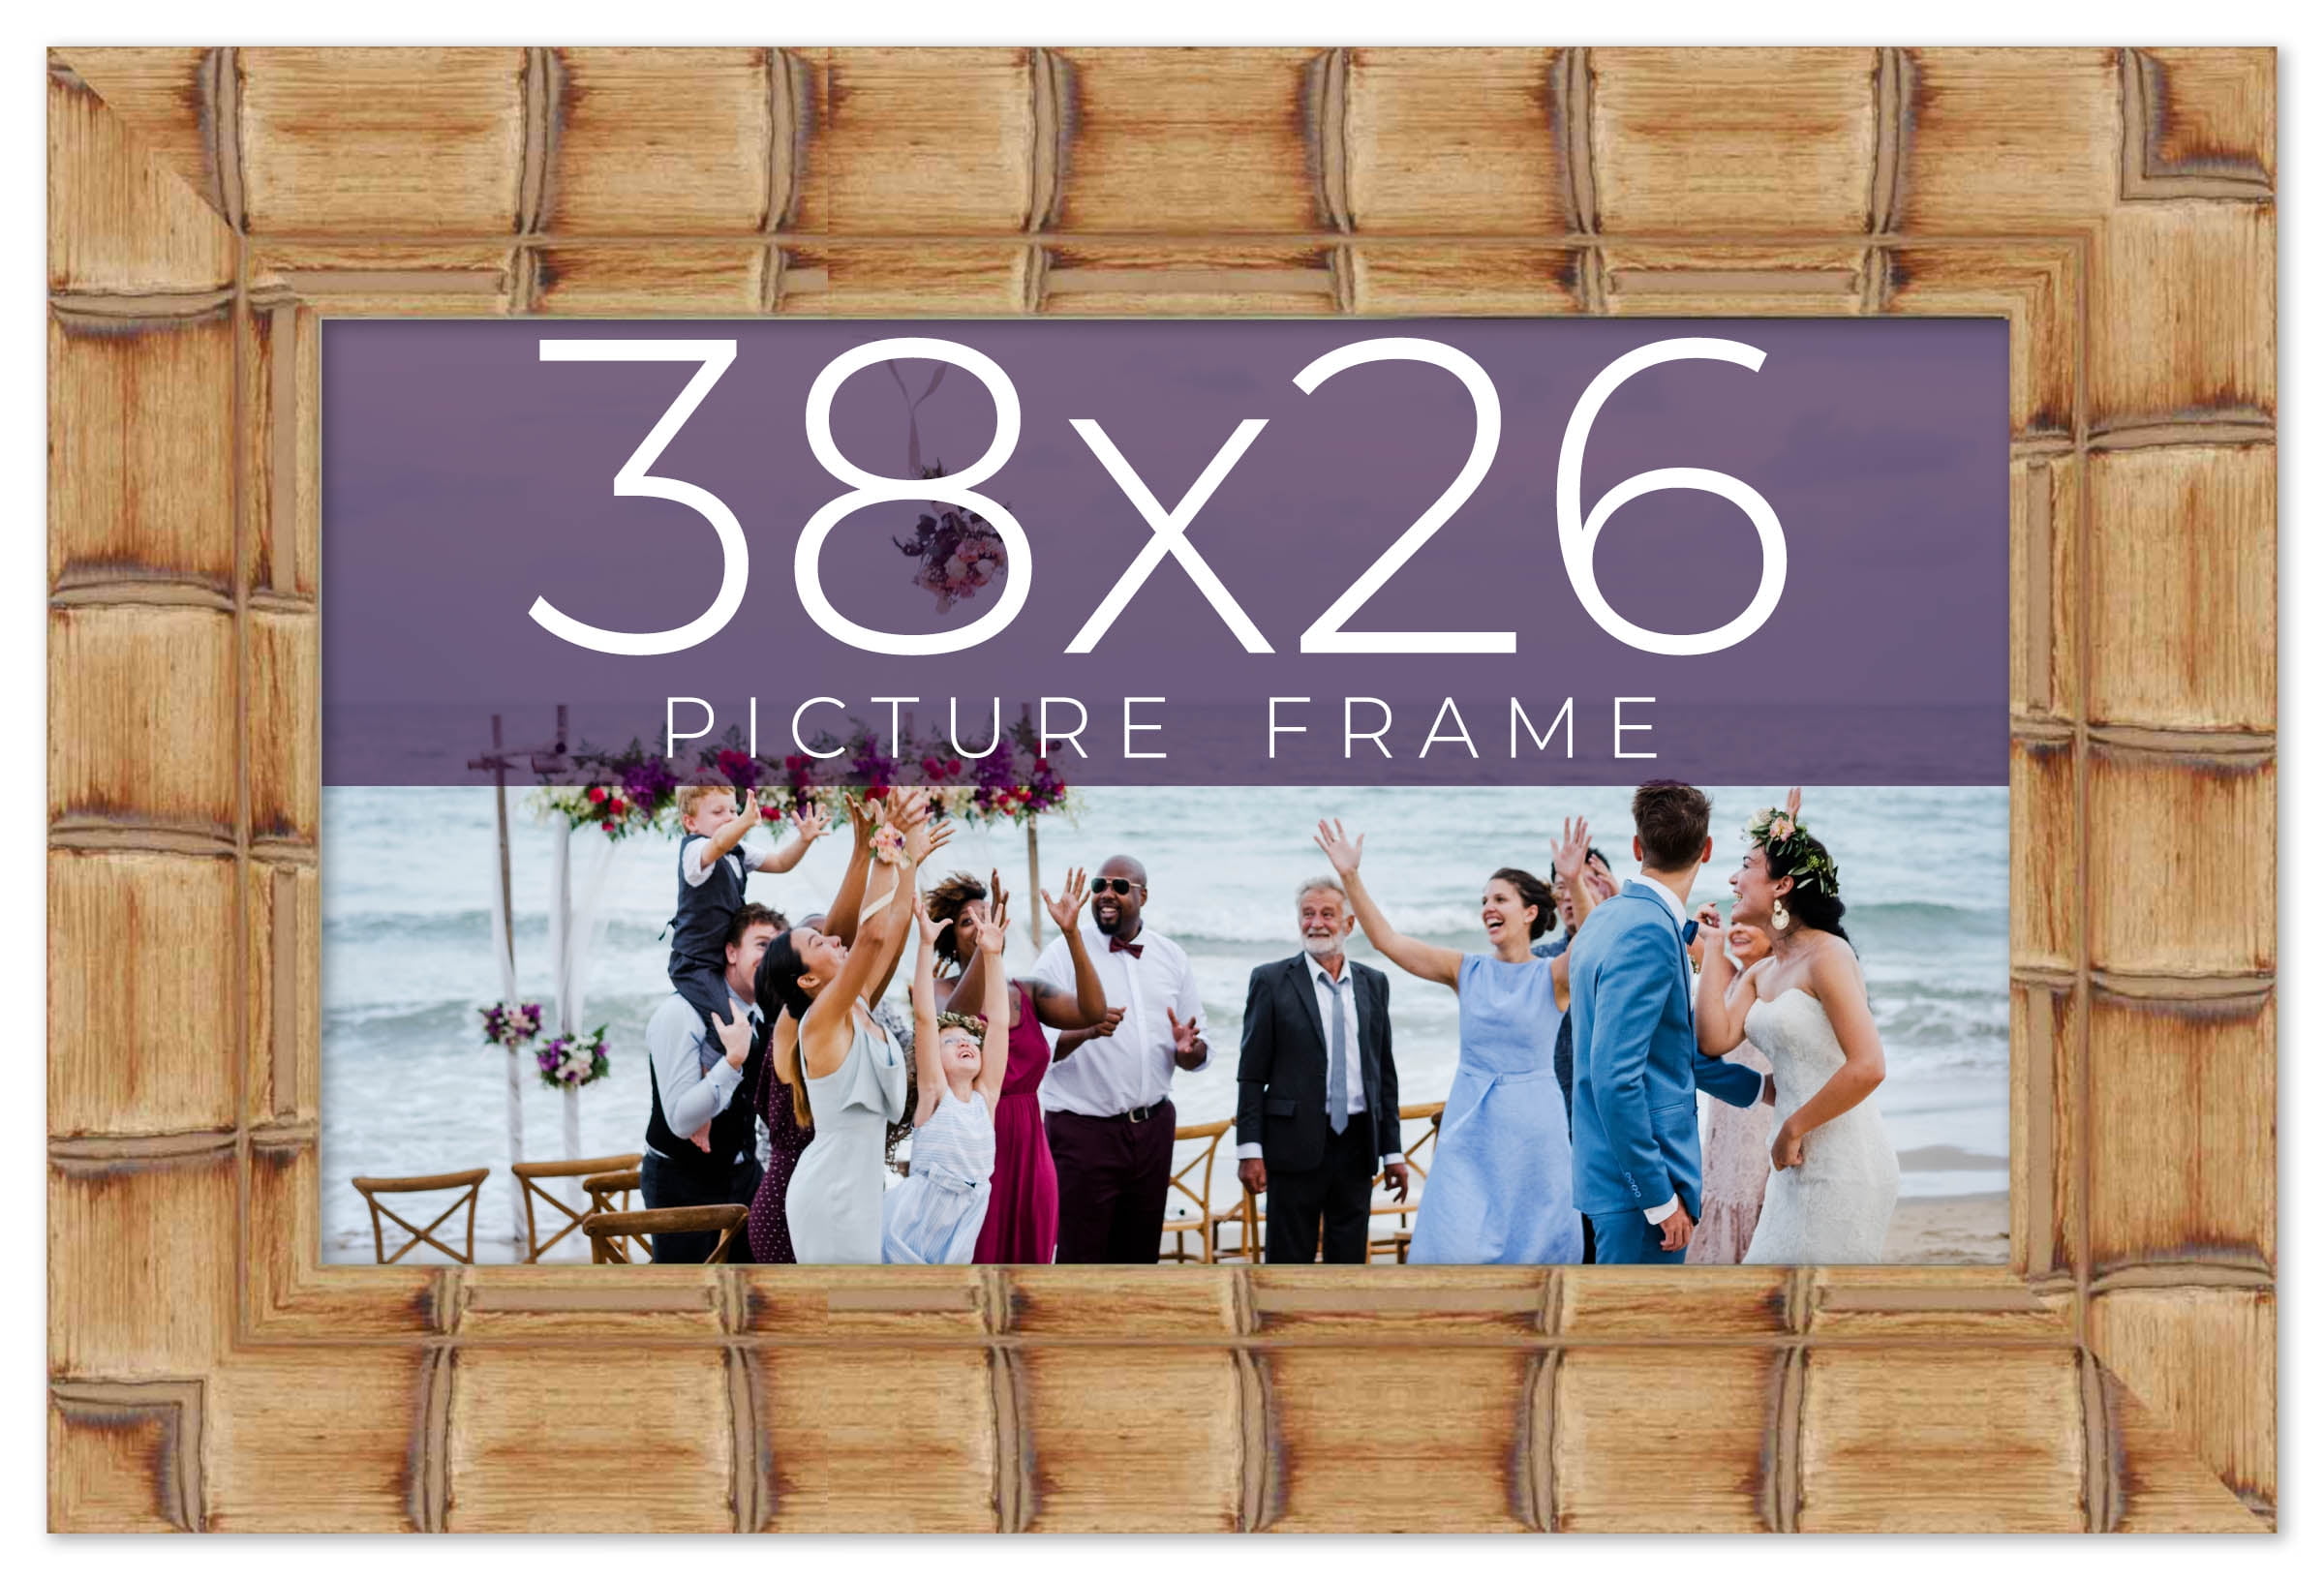 38x26 Traditional Gold Complete Wood Picture Frame with UV Acrylic, Foam Board Backing, & Hardware